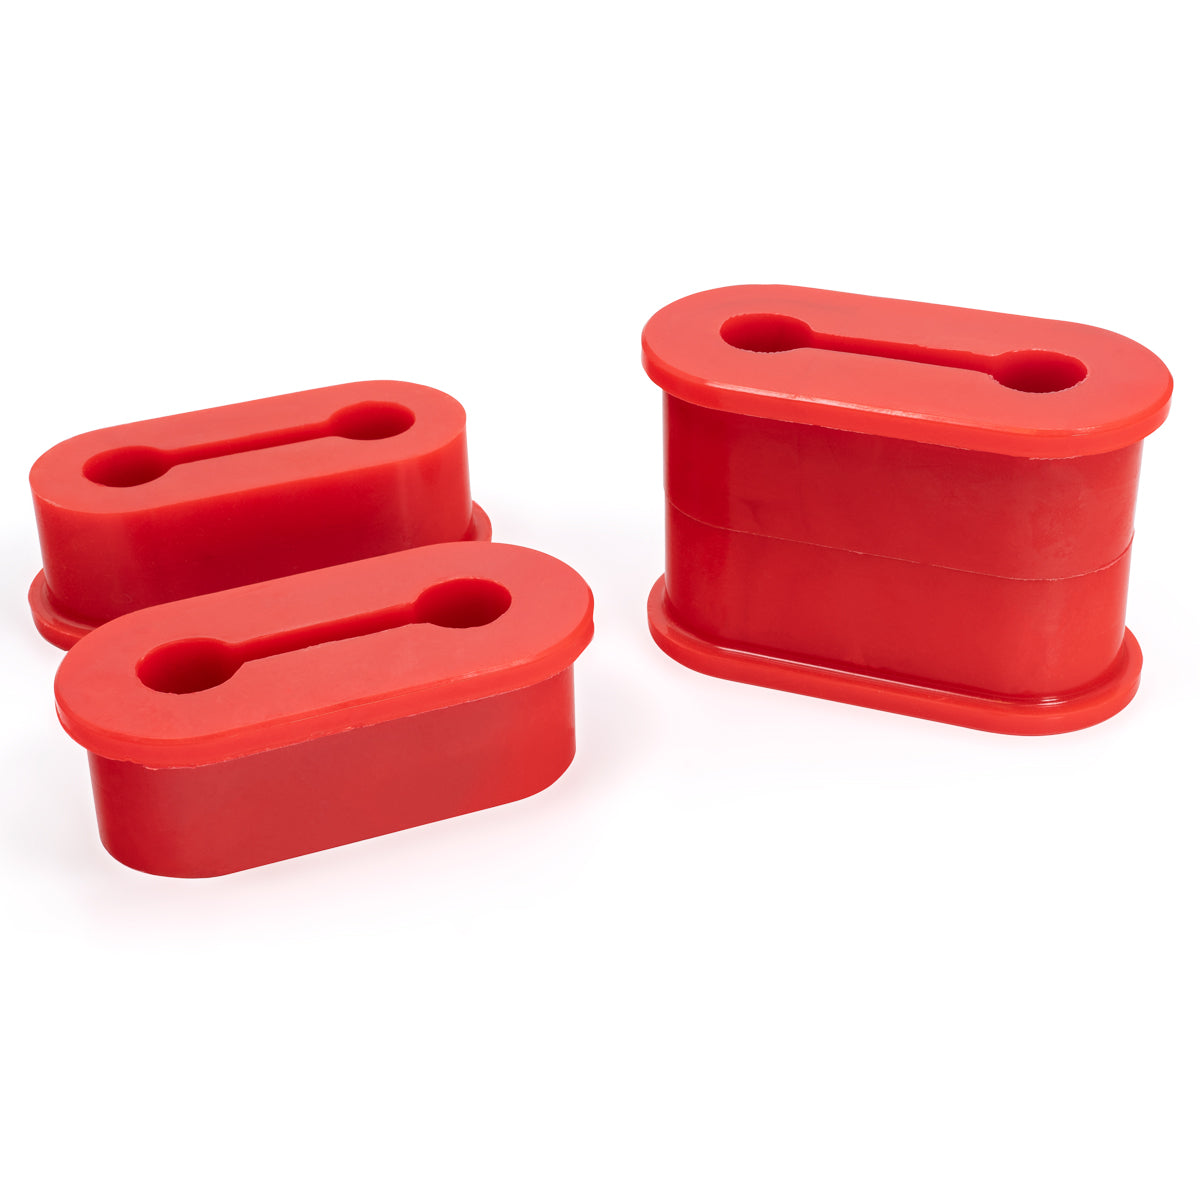 PPE Diesel High-performance Silicone Bushing - 70 Hardness Red 168030174